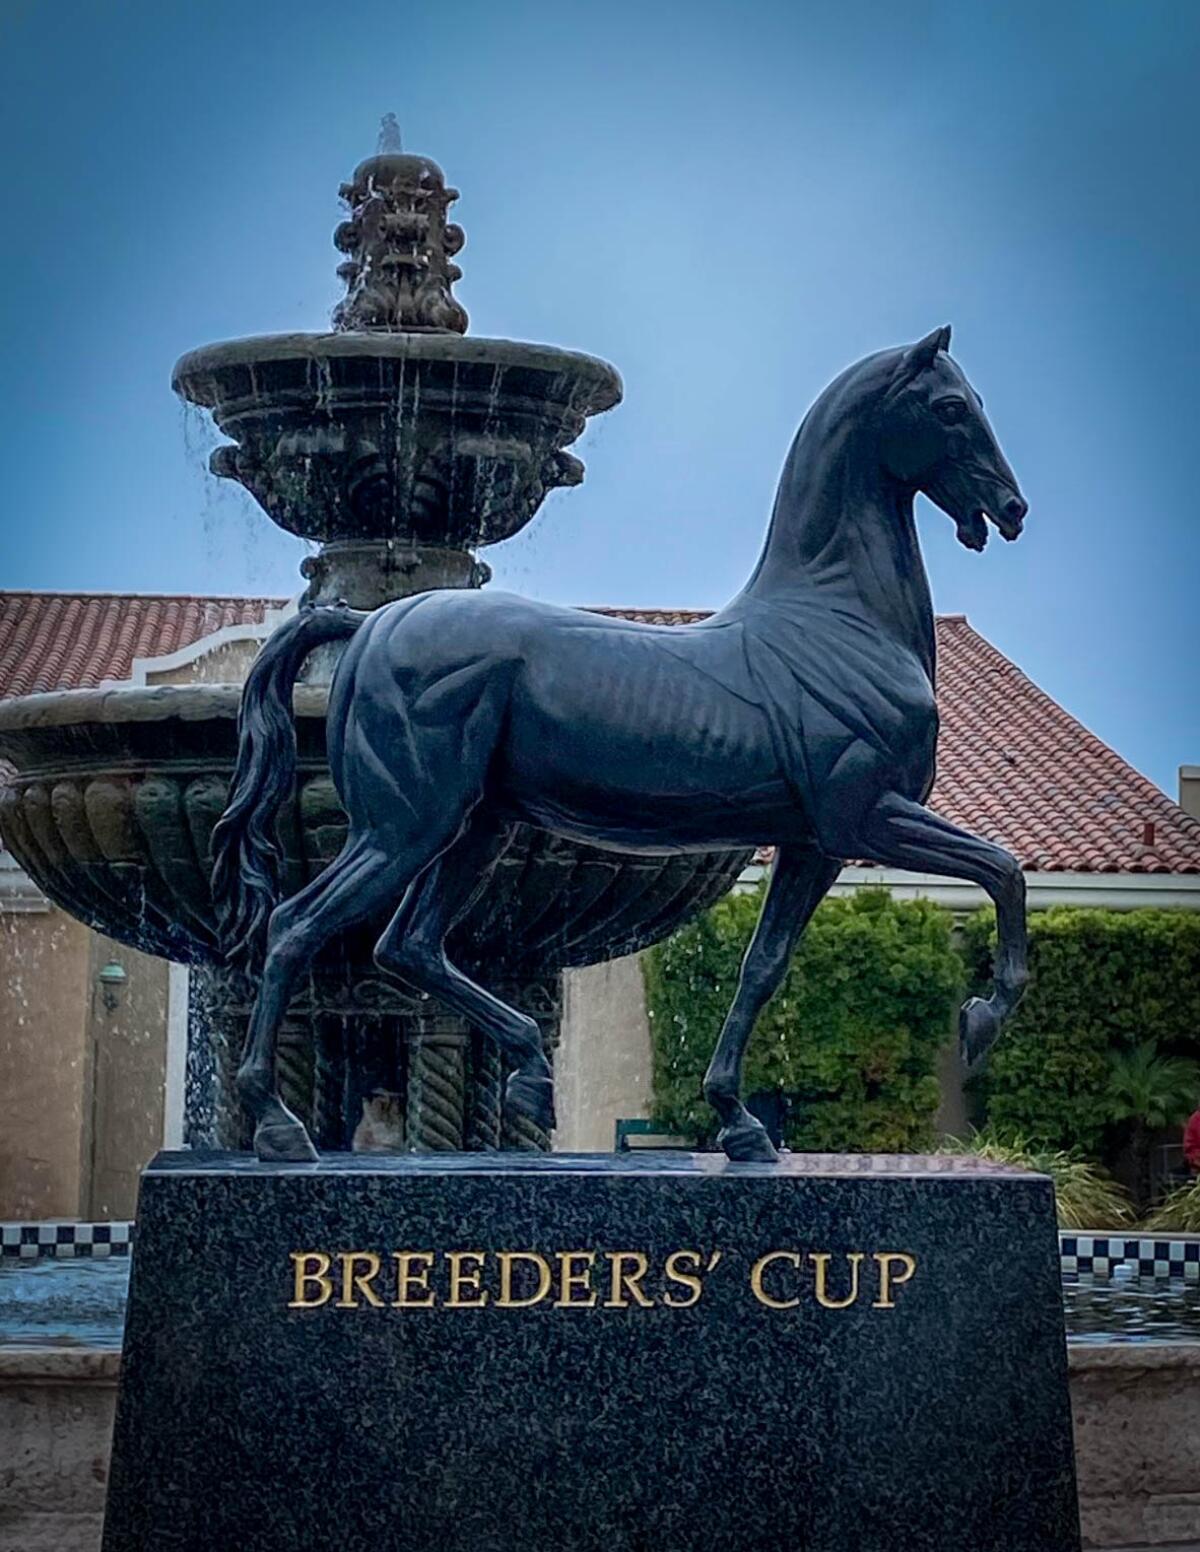 This Breeders' Cup statue